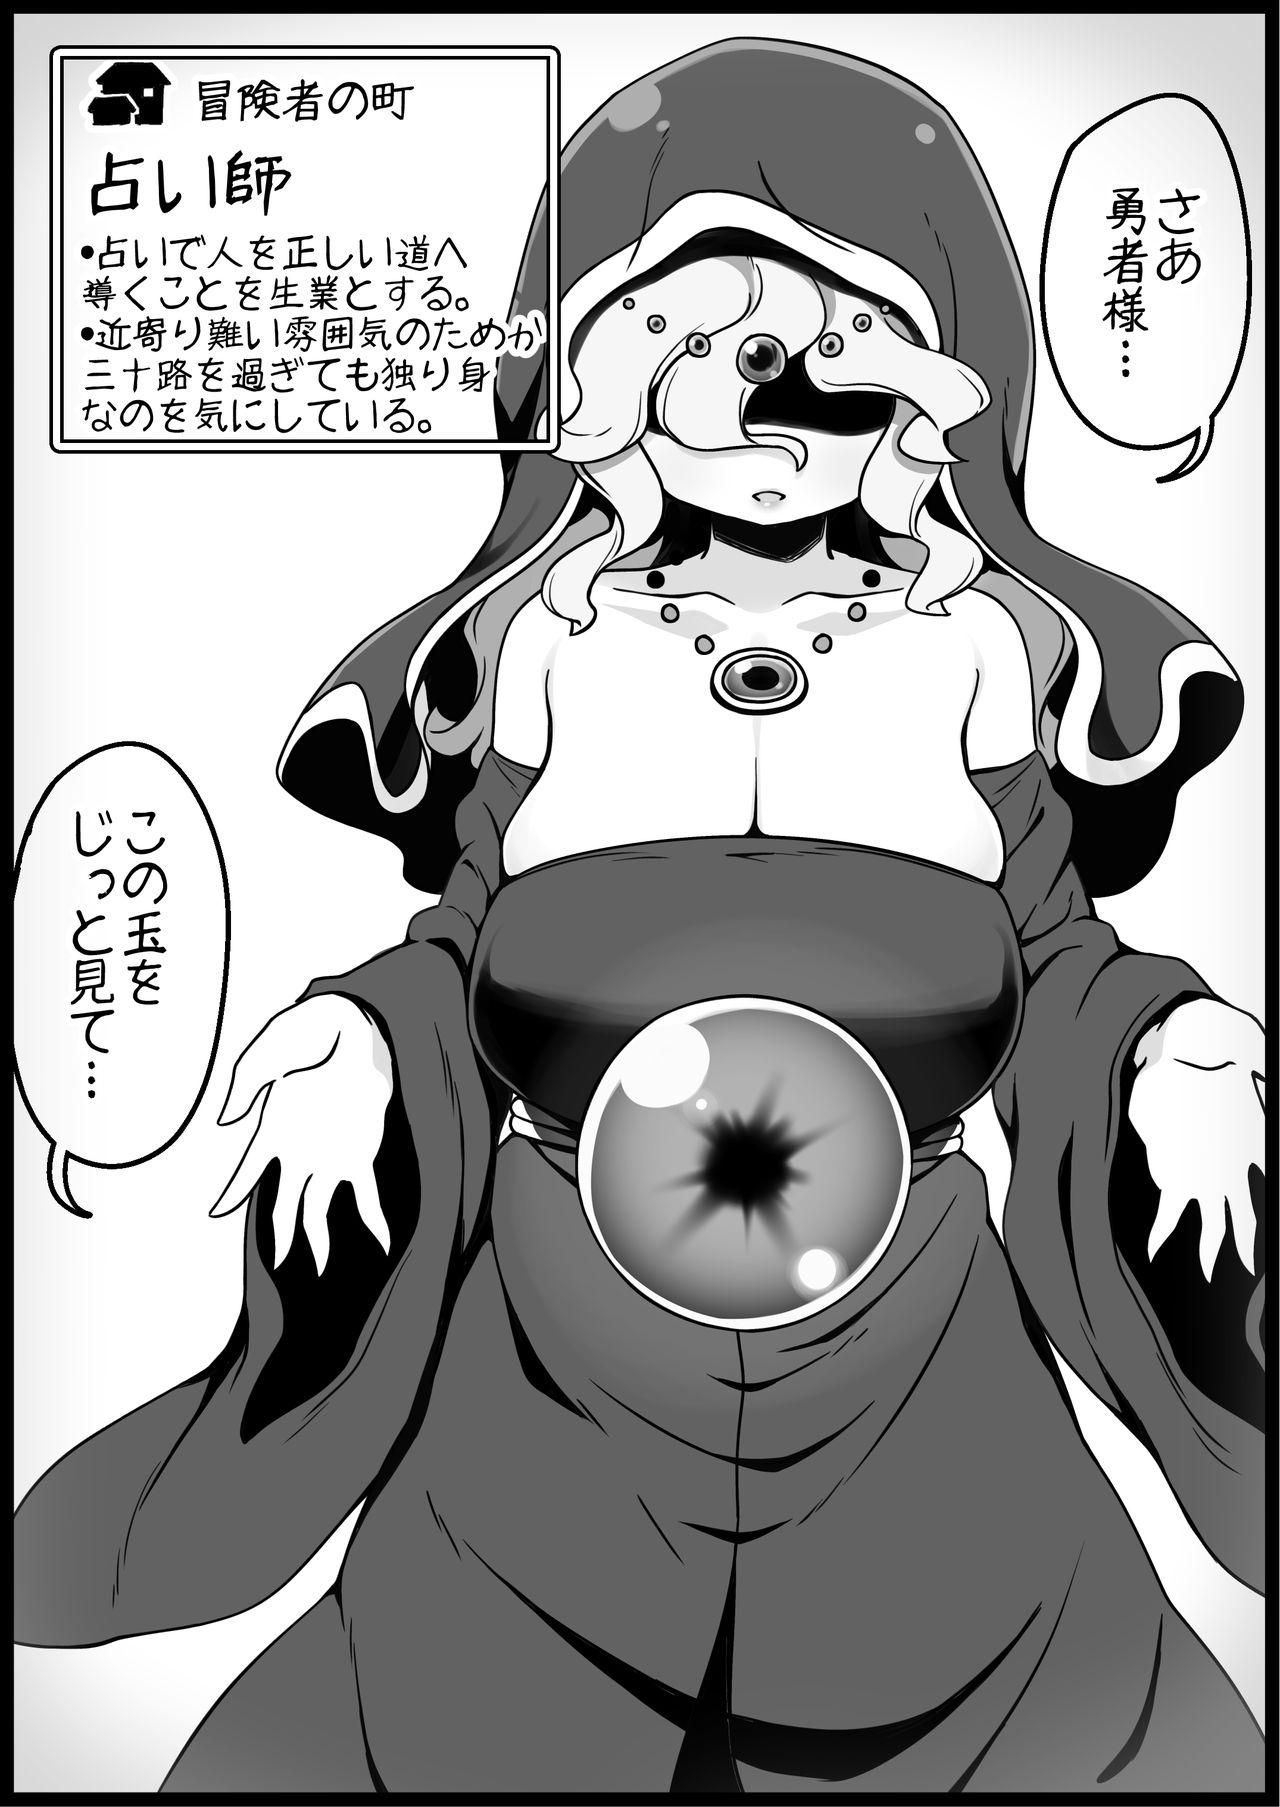 [Succubus Egg] Fantasy World 2 Too Forgiving to Heroes-Continued NPC (mob) Opponent-Centered Short H Manga Collection- 6